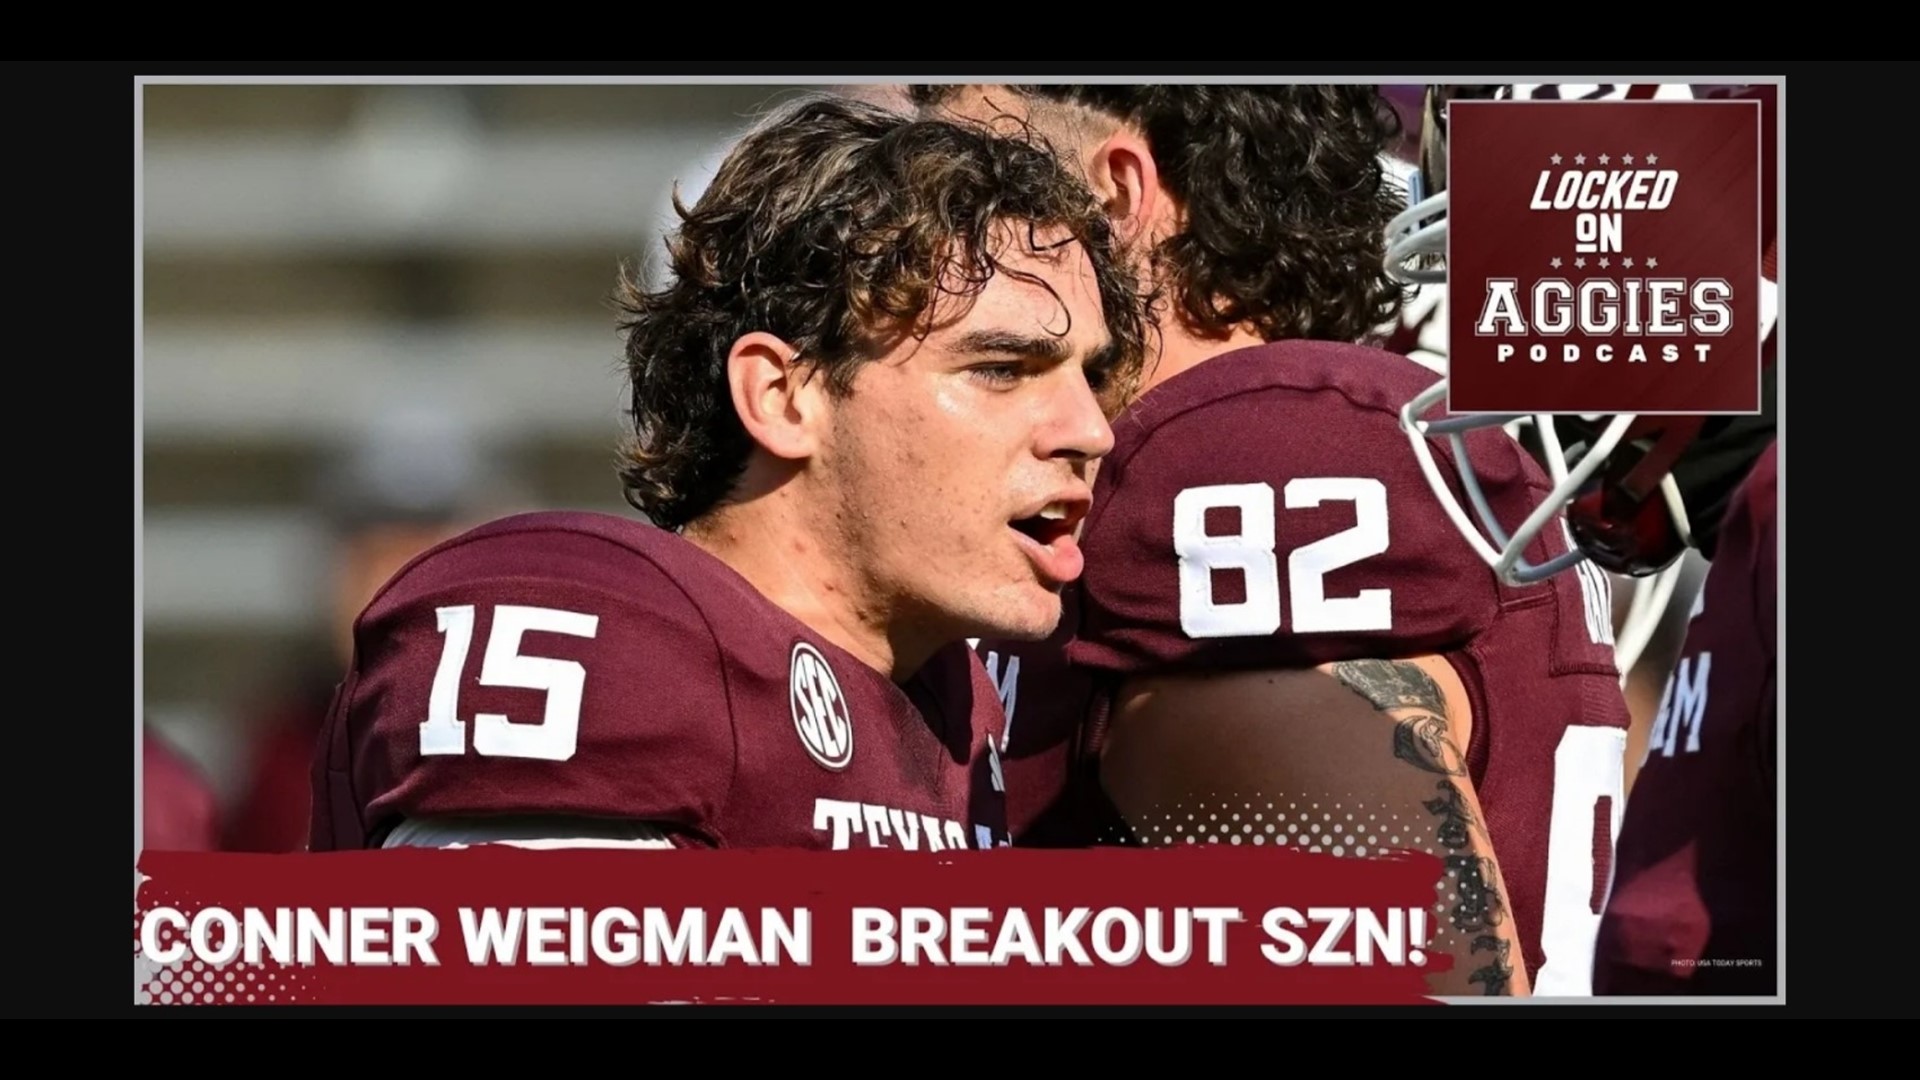 On this episode of Locked On Aggies, host Andrew Stefaniak makes a case for why Texas A&M starting quarterback Conner Weigman is set to break out against the Auburn.